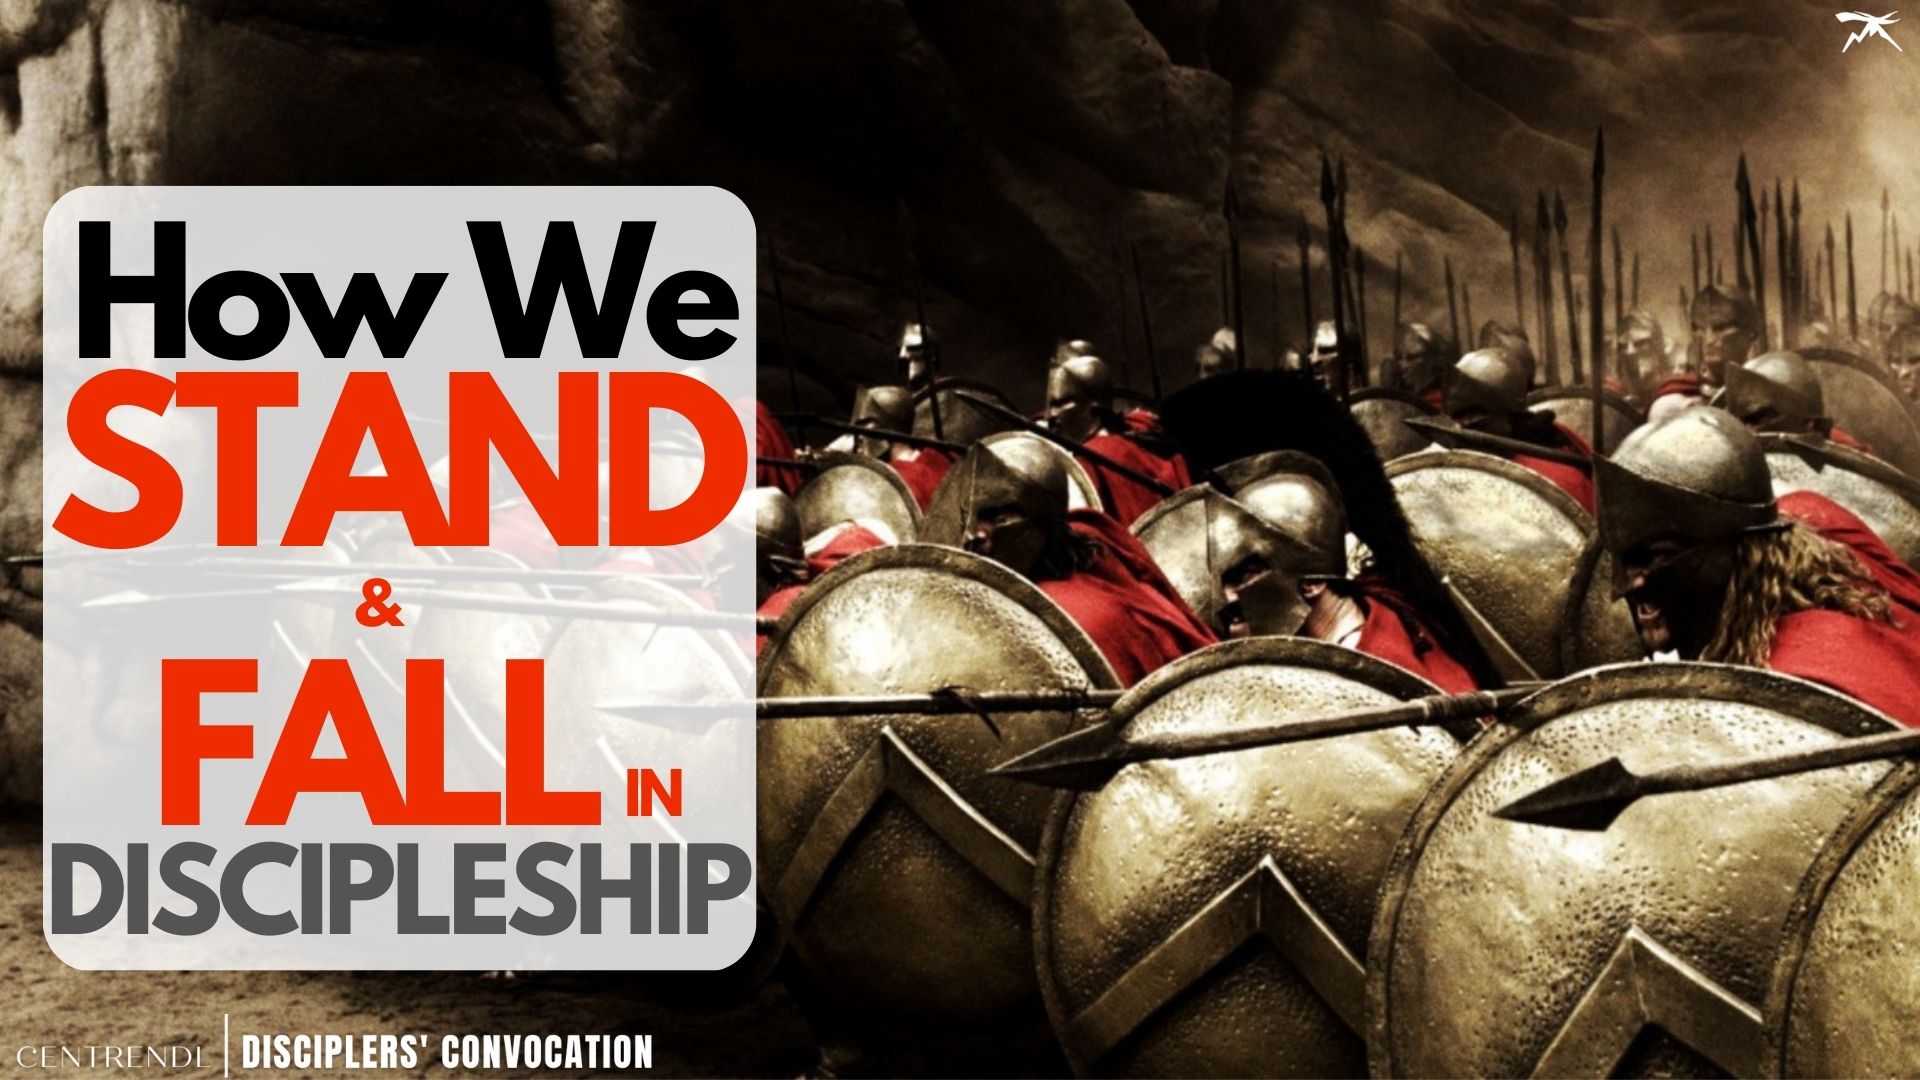 How We STAND And FALL In Discipleship (The Truth About Our MINDS And HEARTS Revealed)